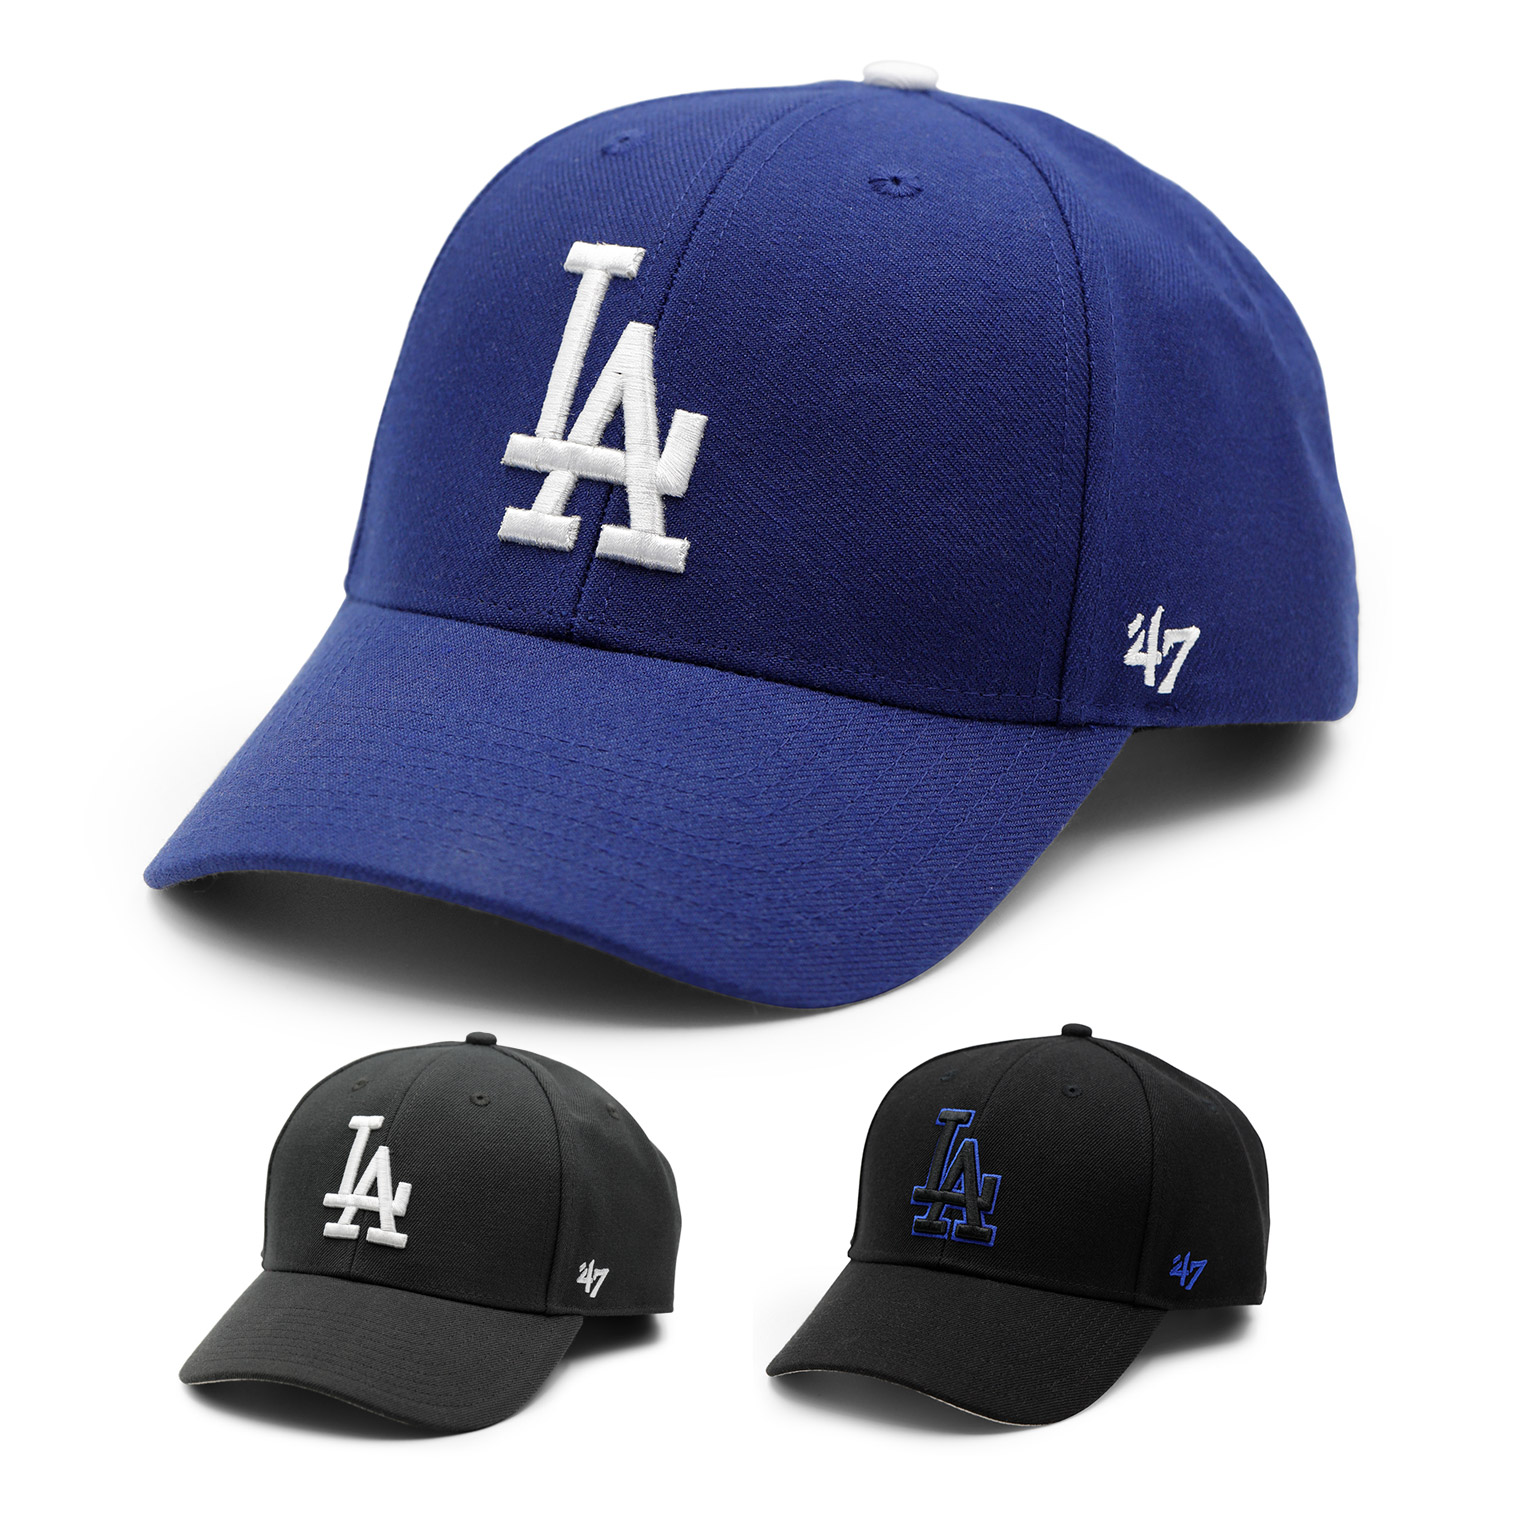 Dodgers Wear Never-Before-Seen Hats on Saturday - Inside the Dodgers